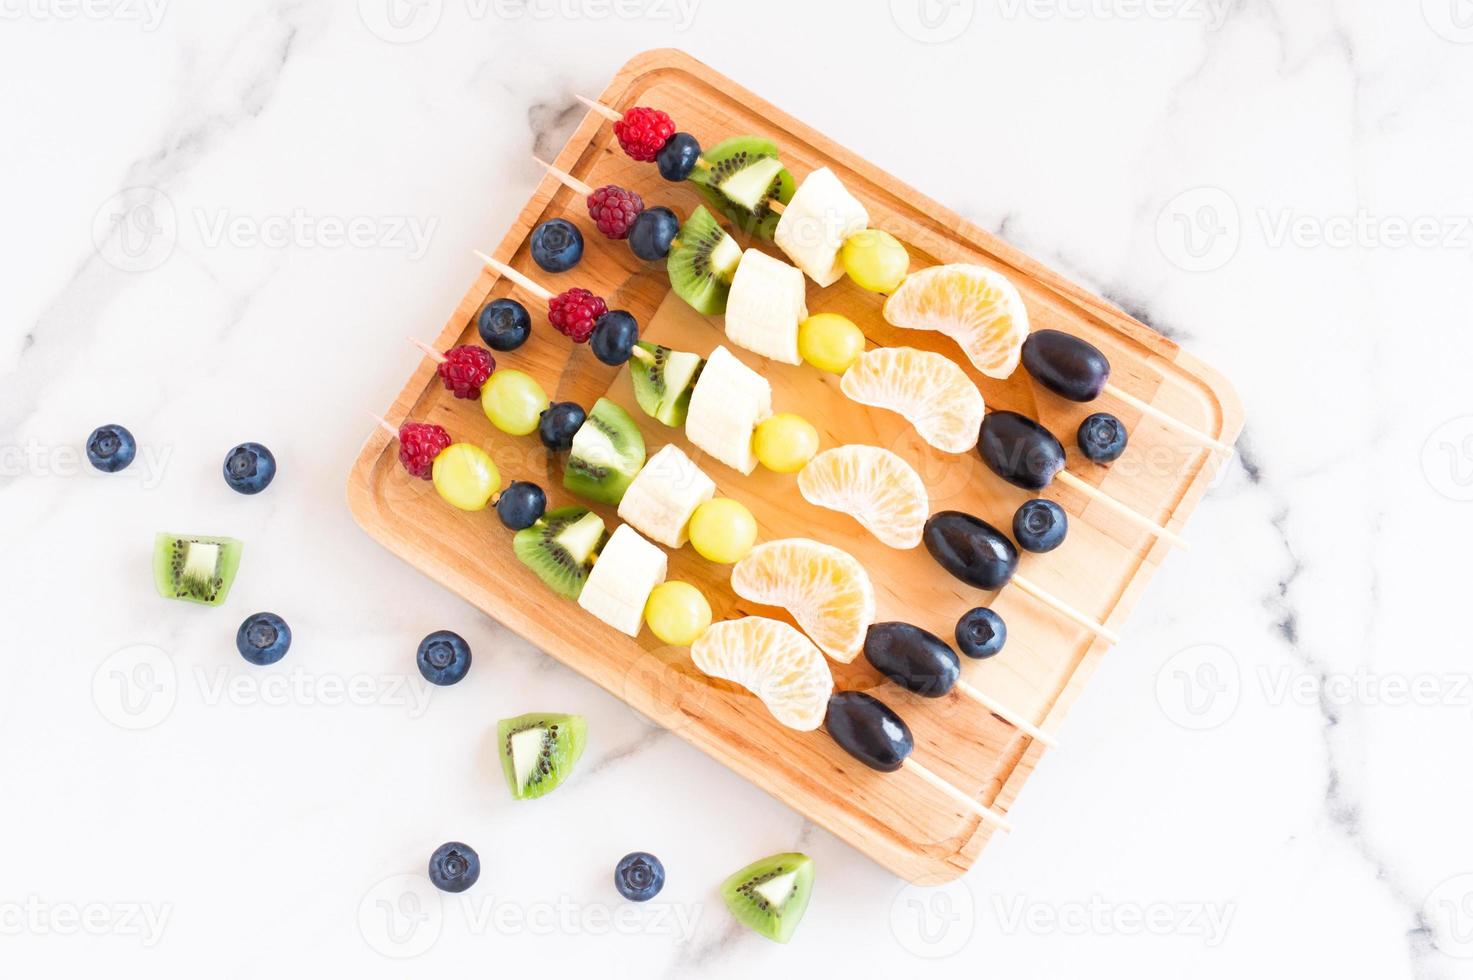 Fruit canapes on a wooden board.delicious and healthy food.mix of tangerine, kiwi, banana, grapes.view from above. photo